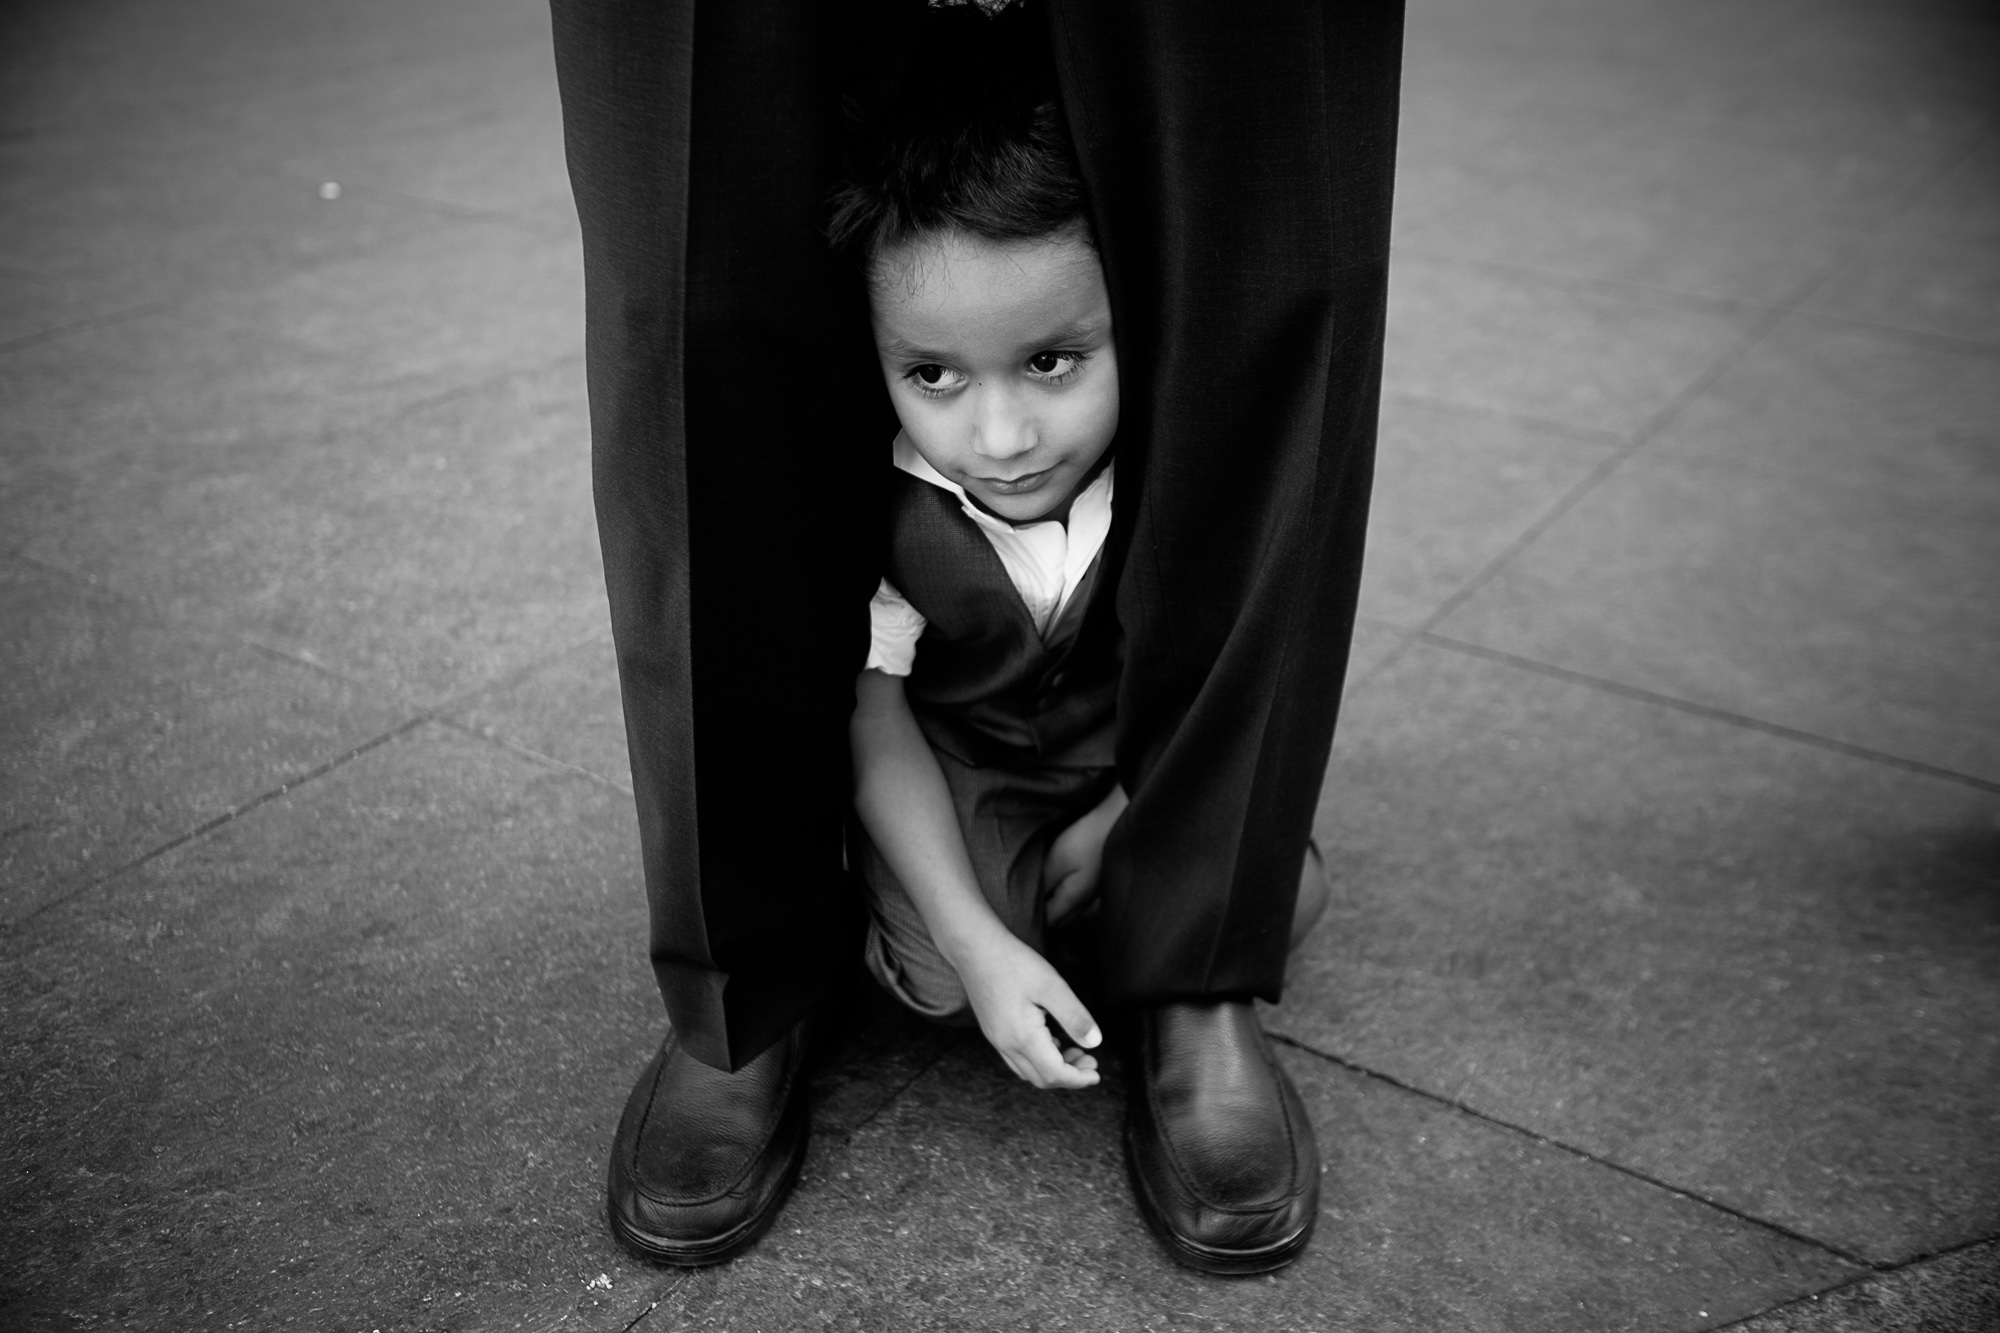  The nephew hides between his dad's legs while waiting to have his portrait taken at the wedding. 